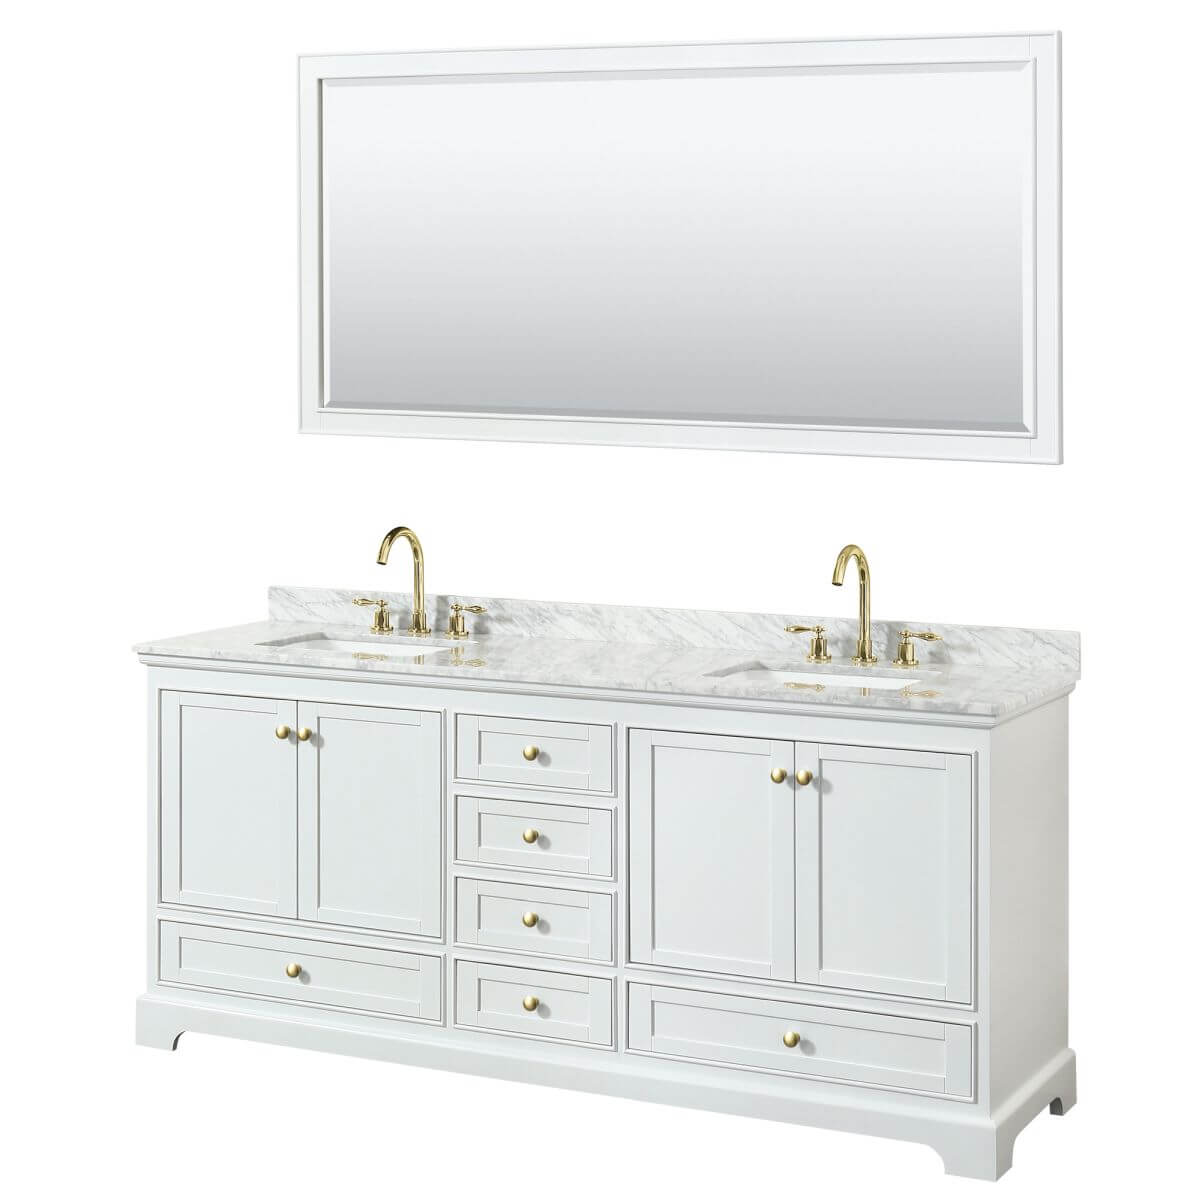 Wyndham Collection Deborah 80 inch Double Bathroom Vanity in White with White Carrara Marble Countertop, Undermount Square Sinks, Brushed Gold Trim and 70 inch Mirror - WCS202080DWGCMUNSM70